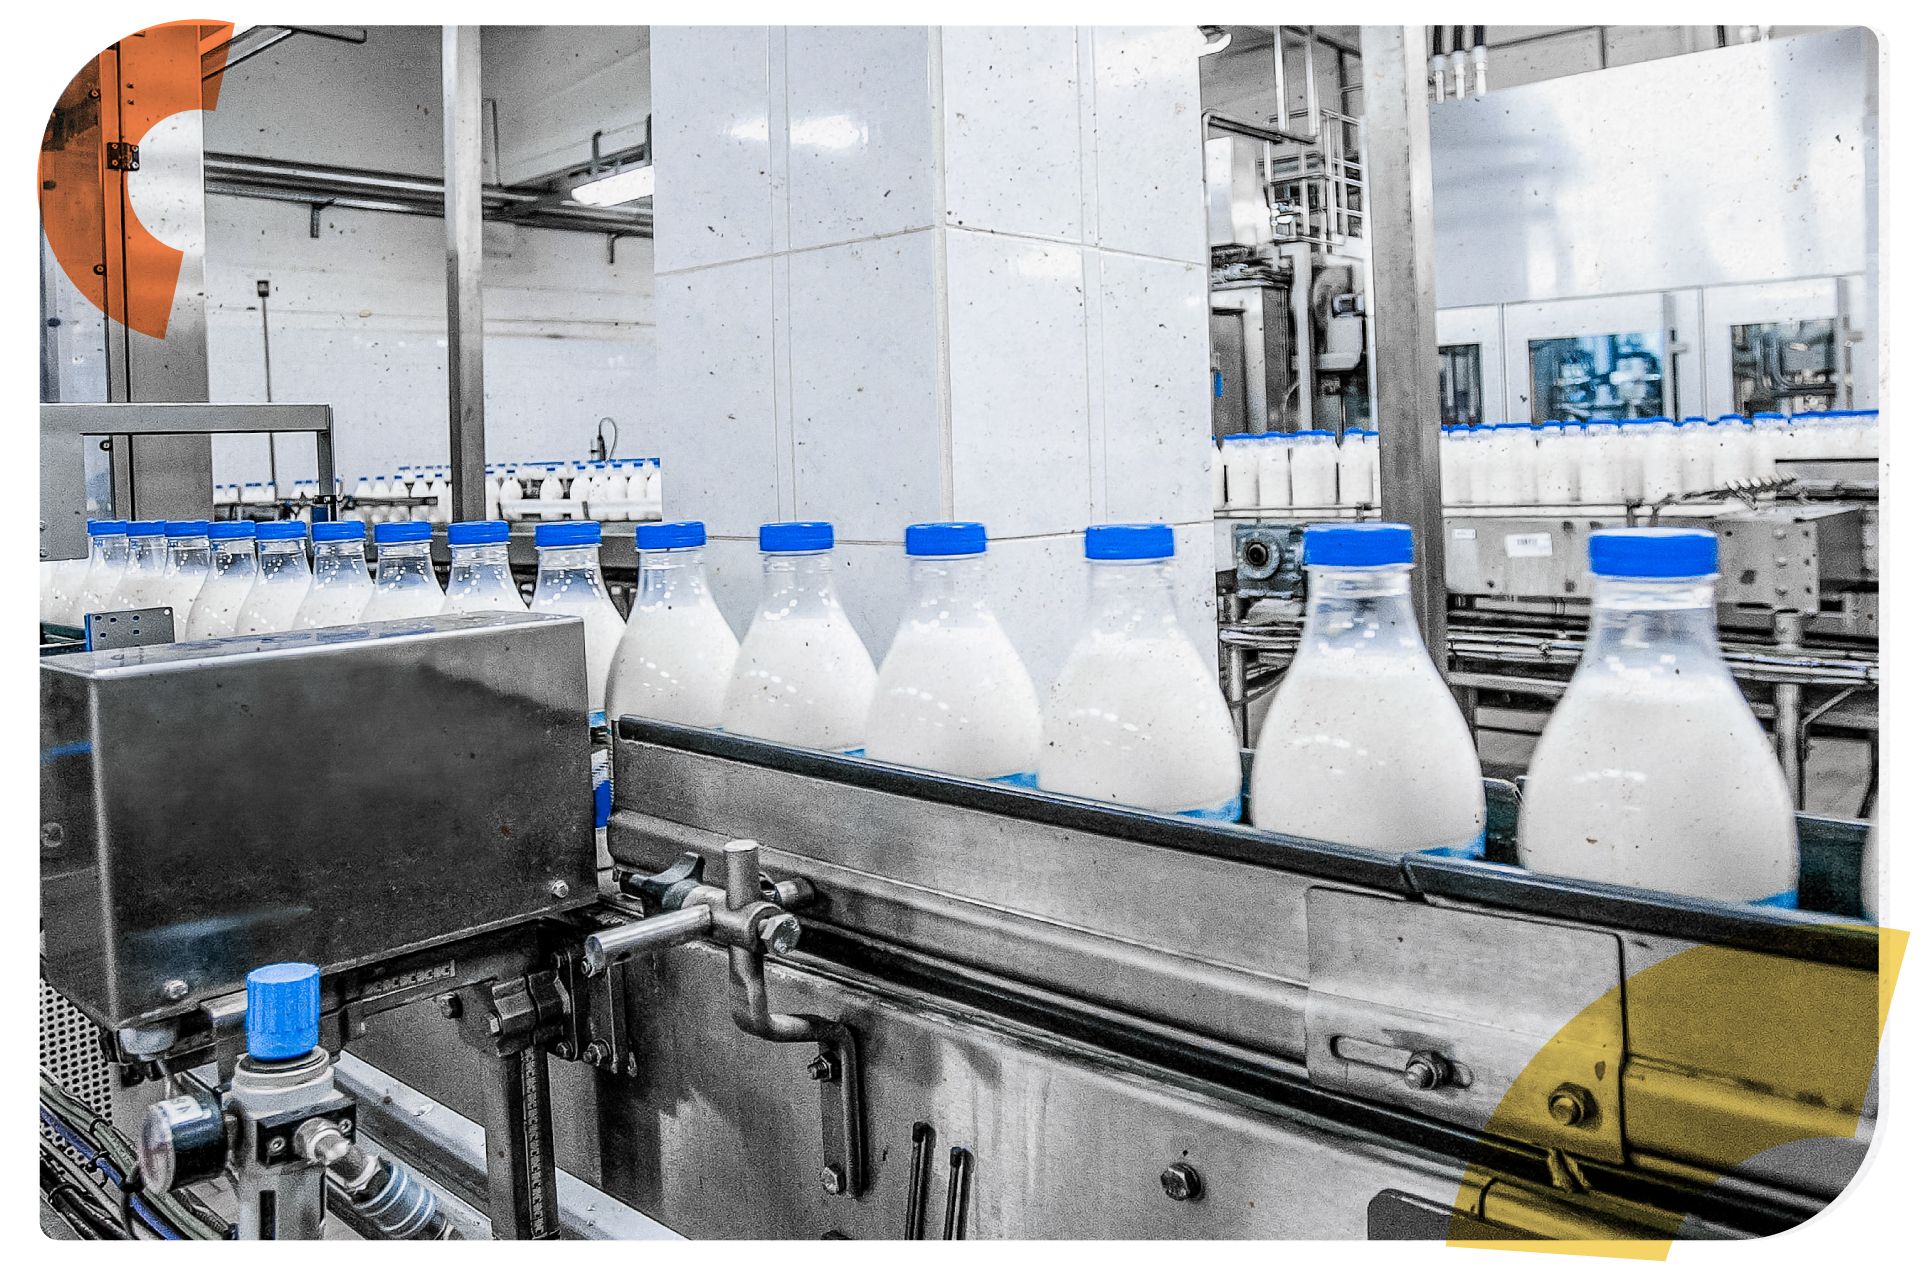 A dairy manufacturing facility with bottles of milk with blue caps on a conveyor belt